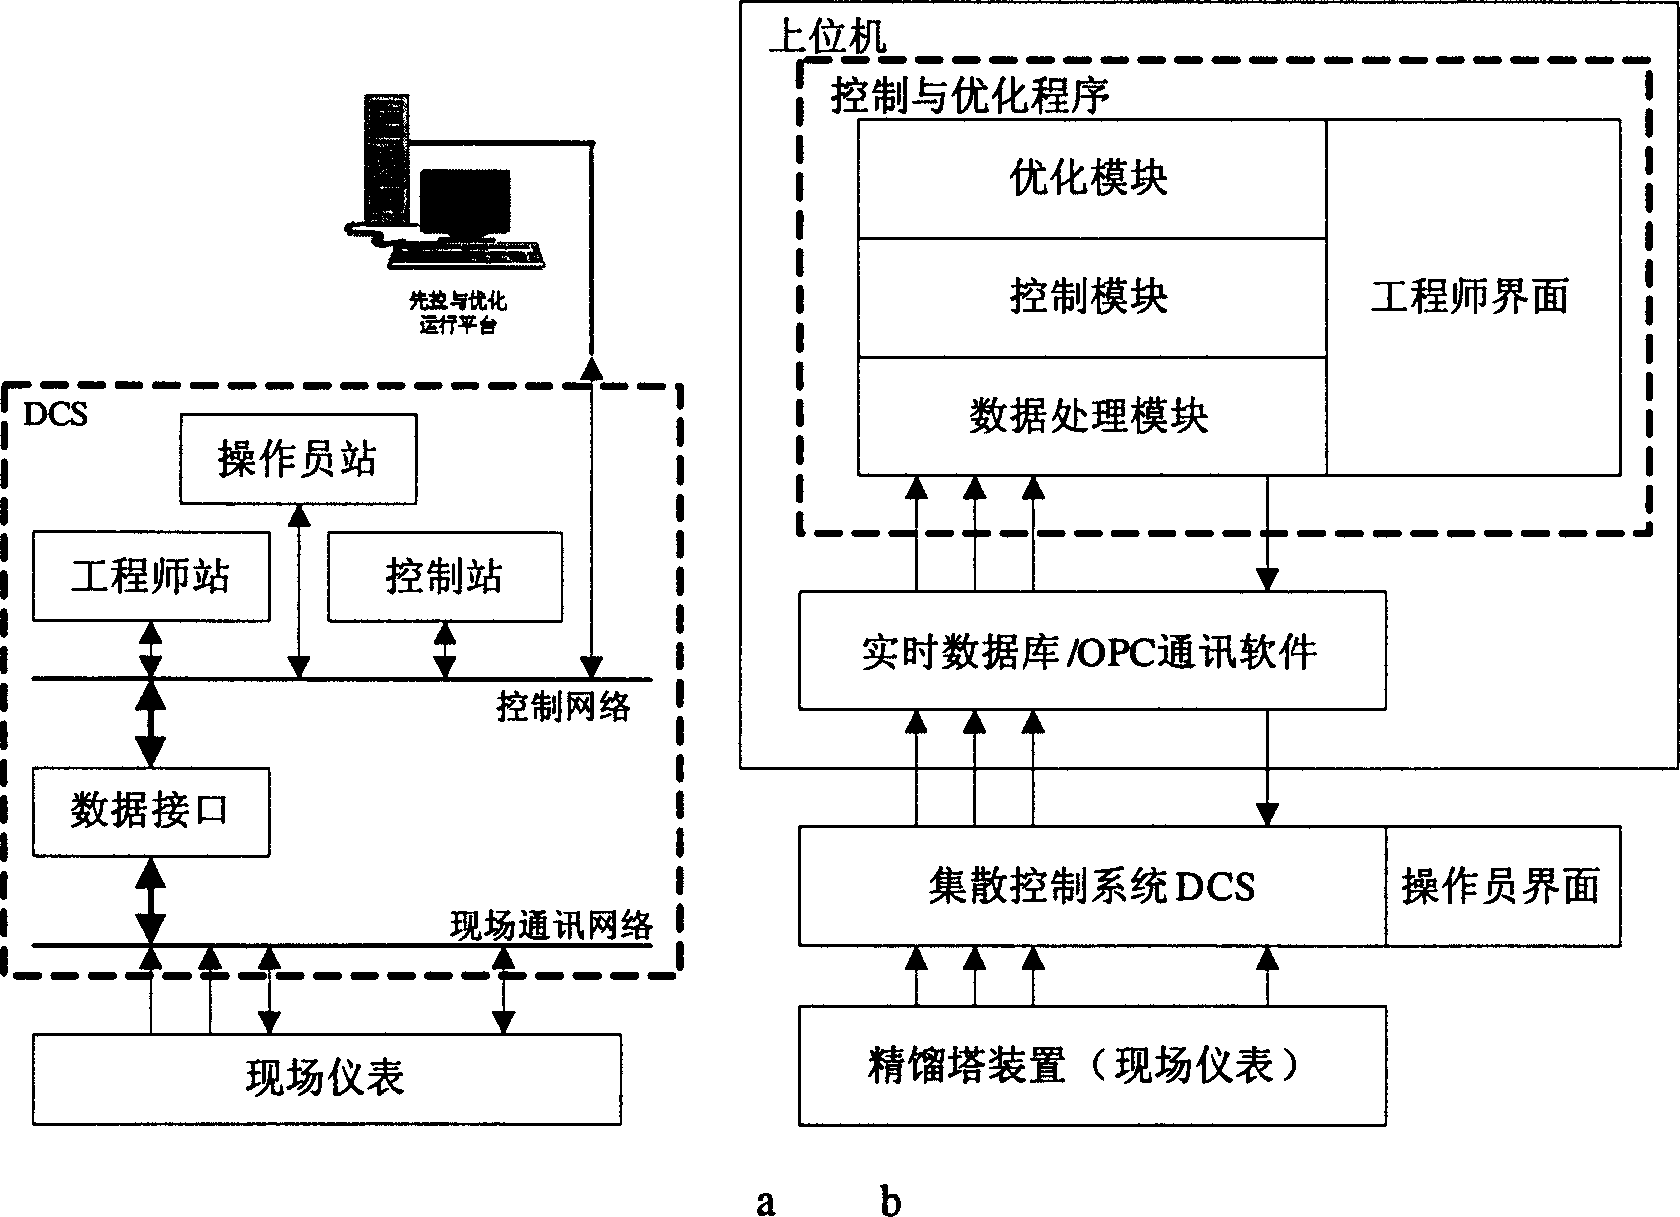 Rectification tower automatic control and optimization method